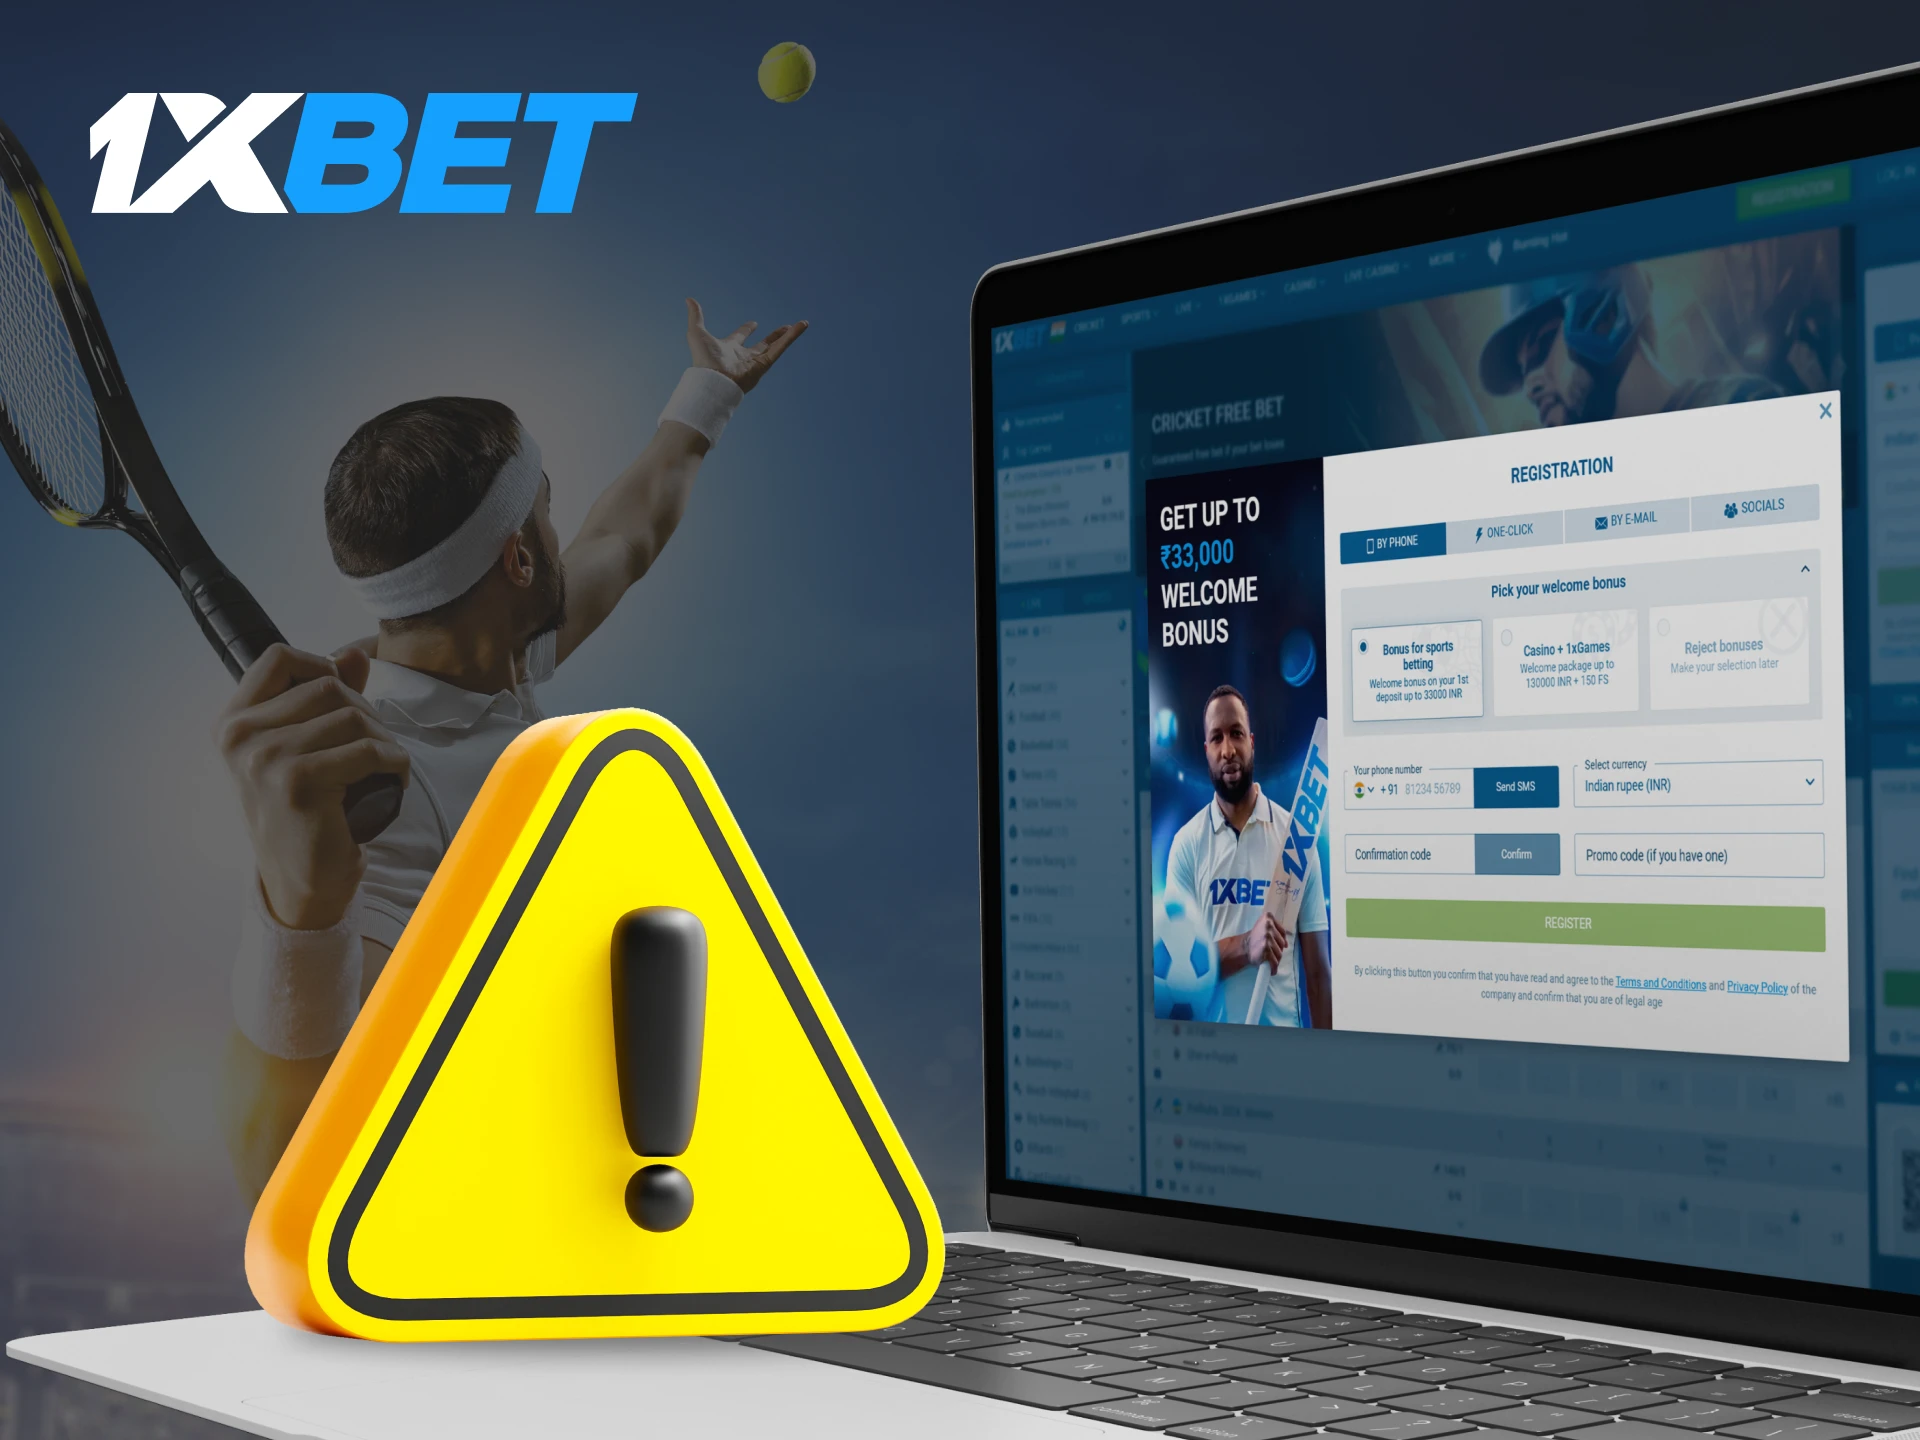 You may encounter these problems when registering with 1xBet.